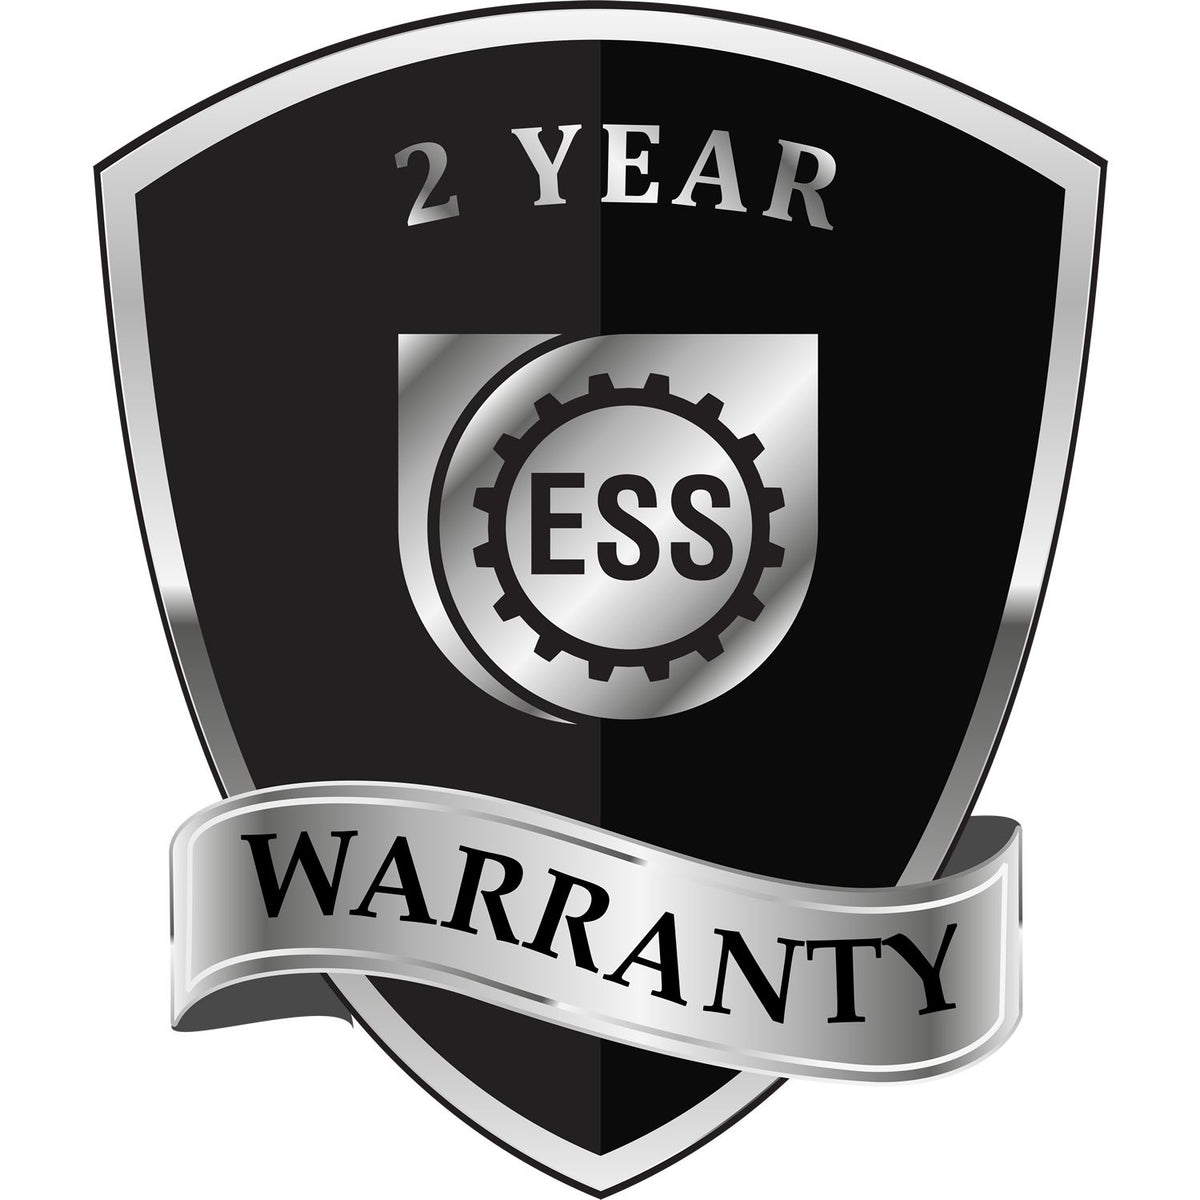 A black and silver badge or emblem showing warranty information for the Hybrid Wyoming Land Surveyor Seal